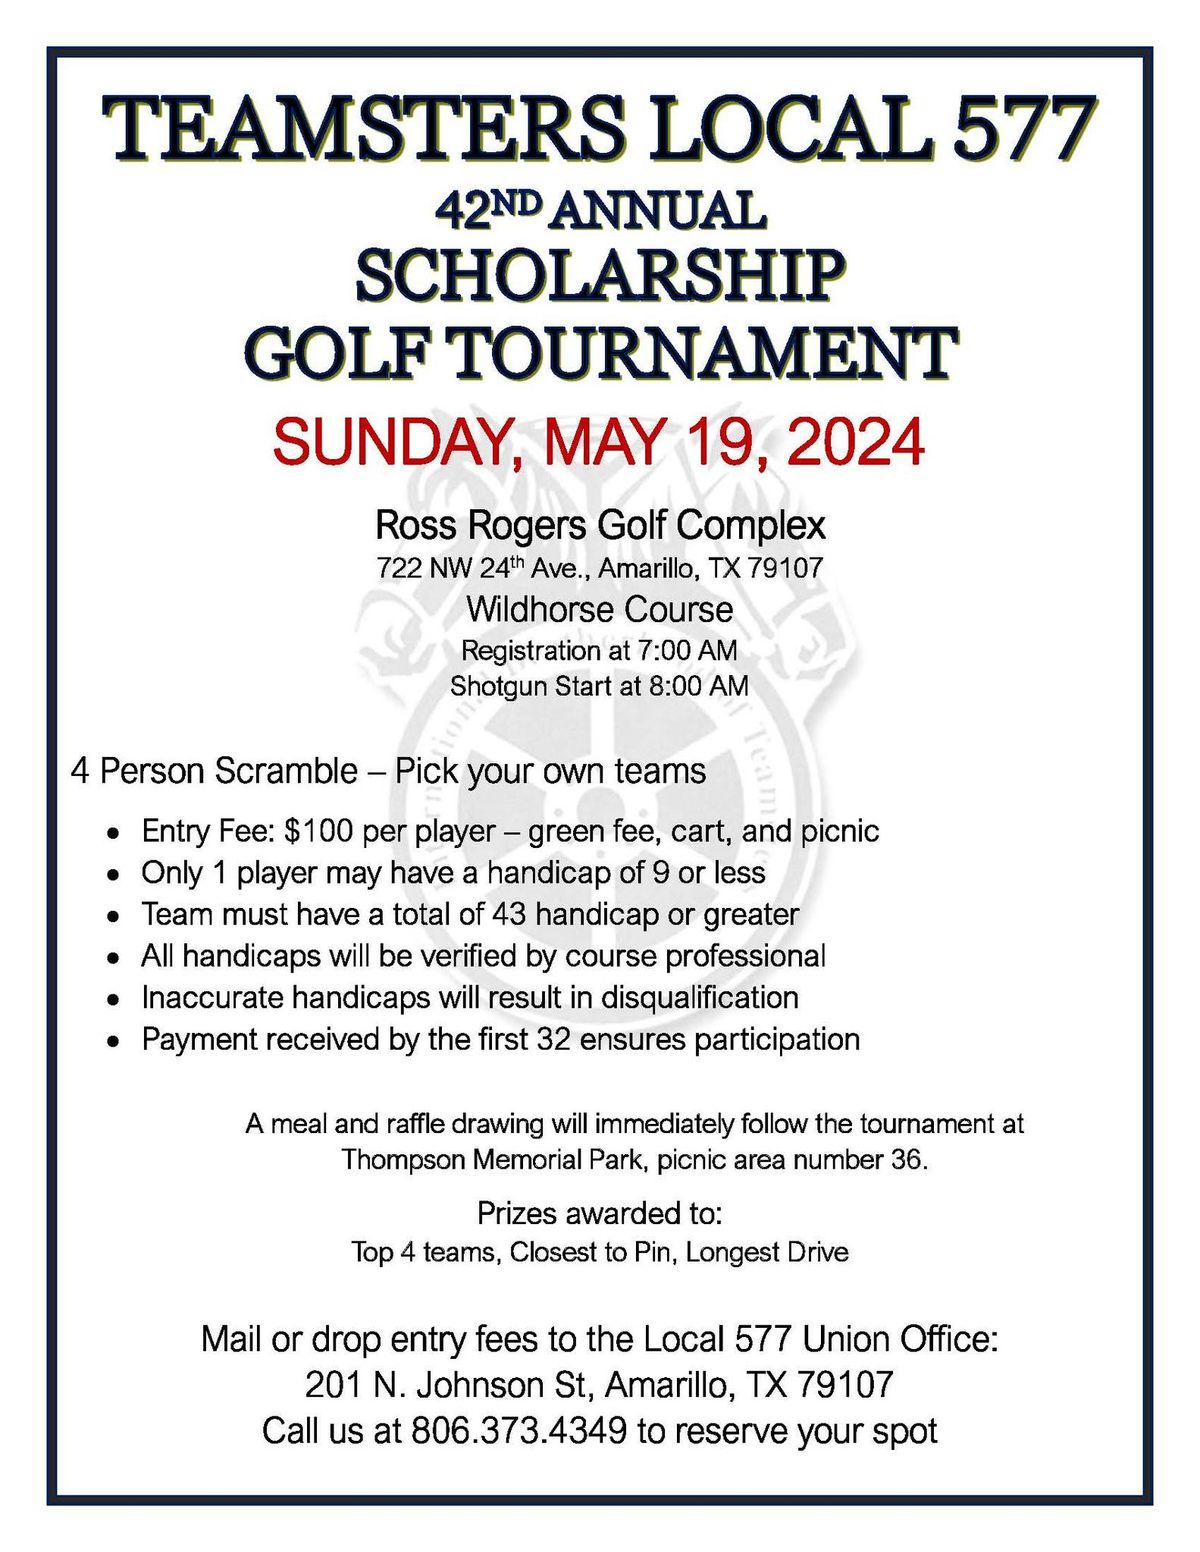 Teamsters Local 577 42nd Annual Scholarship Golf Tournament